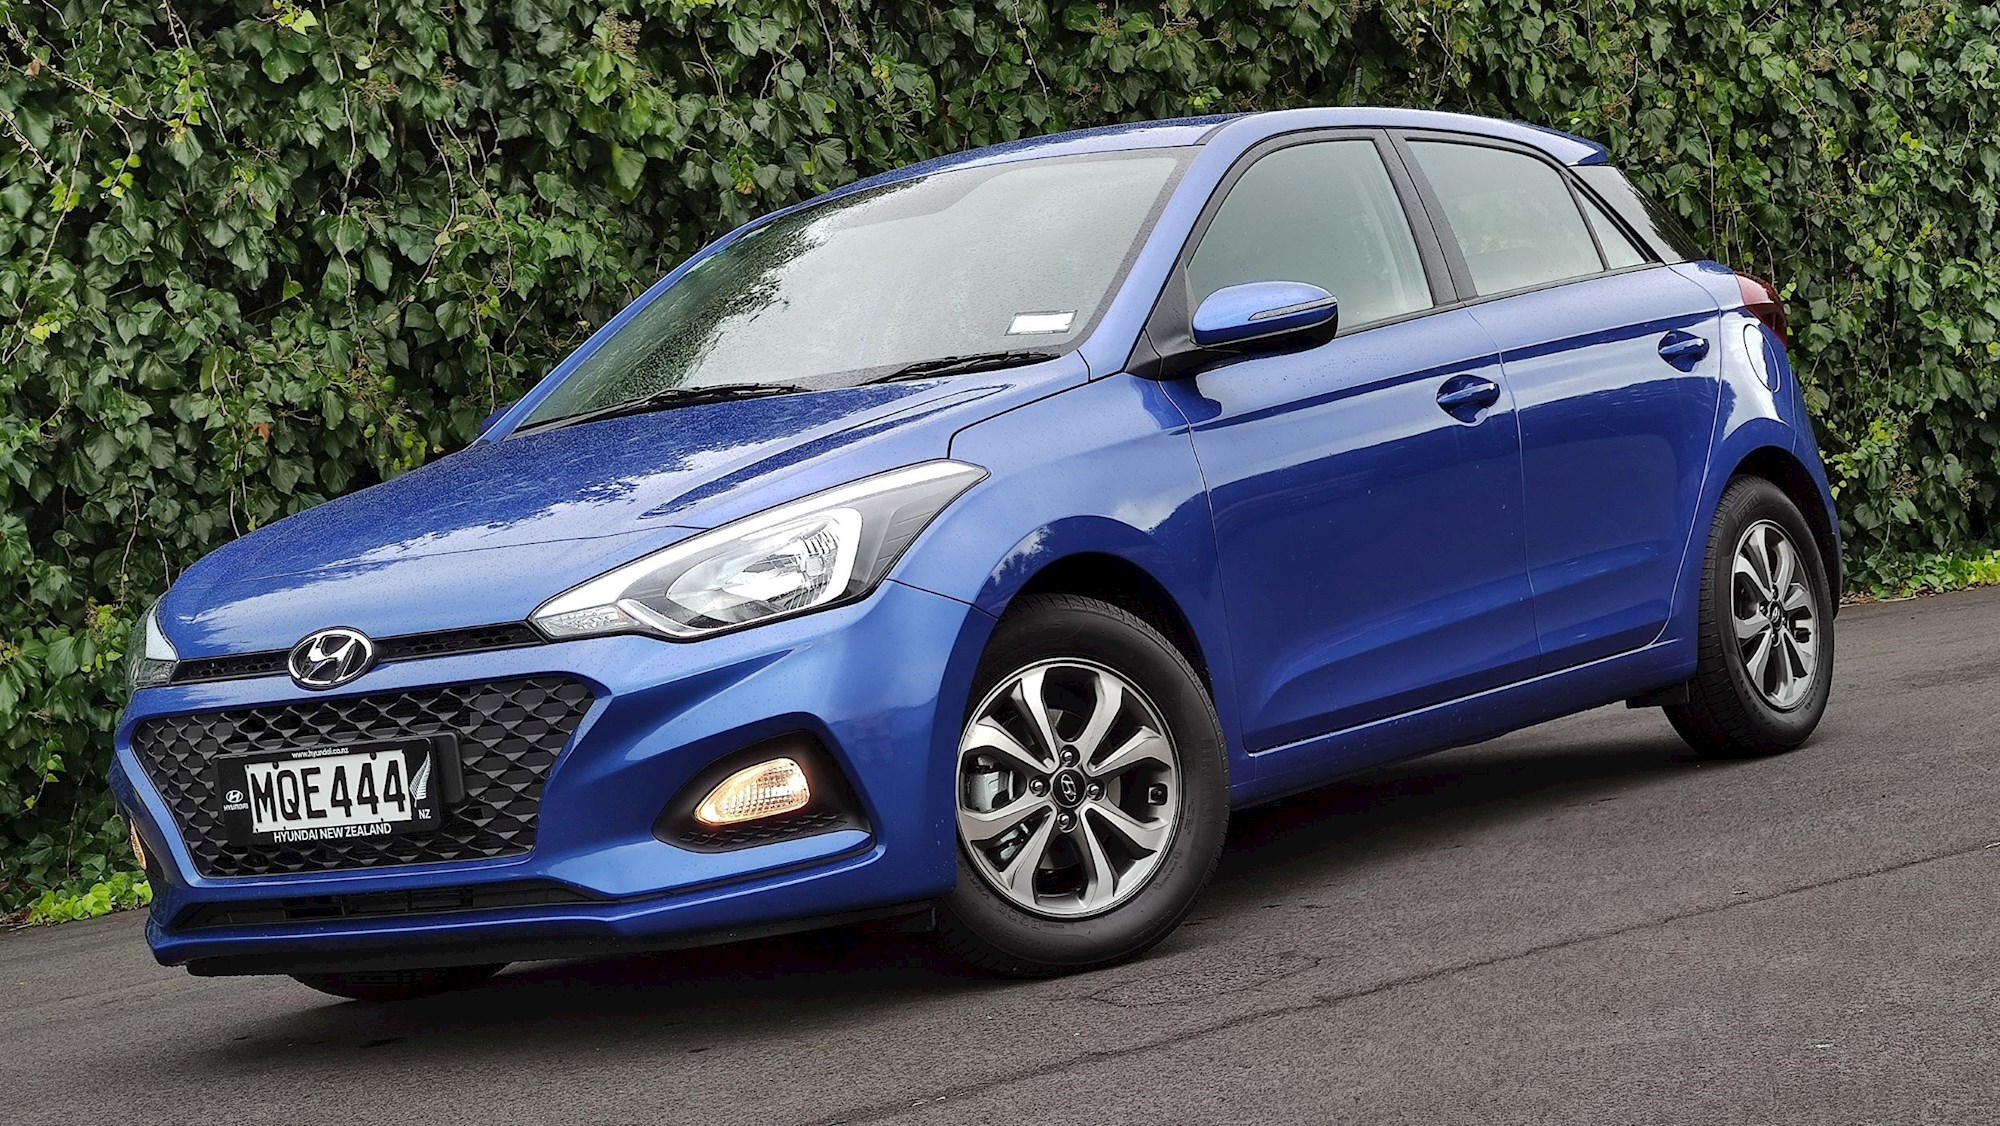 Hyundai i20 review: carries all your gear, not enough gears